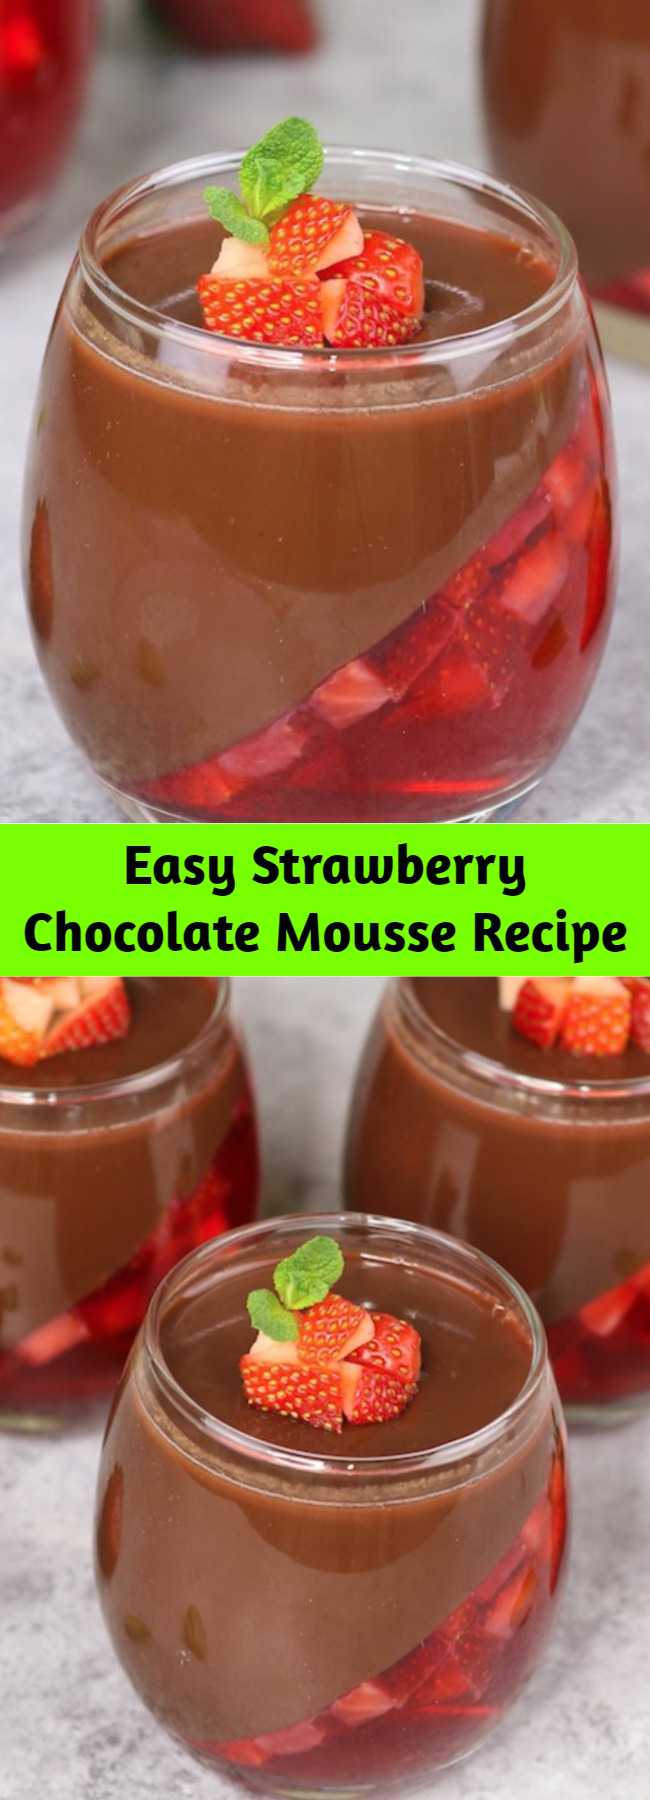 Easy Strawberry Chocolate Mousse Recipe - Strawberry Chocolate Mousse is a delicious make ahead dessert with two layers that you can easily prepare. All you need is a few simple ingredients: fresh strawberries, strawberry jello powder, water, cocoa, sugar, half and half milk and unflavored gelatin. Make this for Valentine's Day, birthdays, Mother's Day, holidays and date night. Make ahead recipe, no bake.